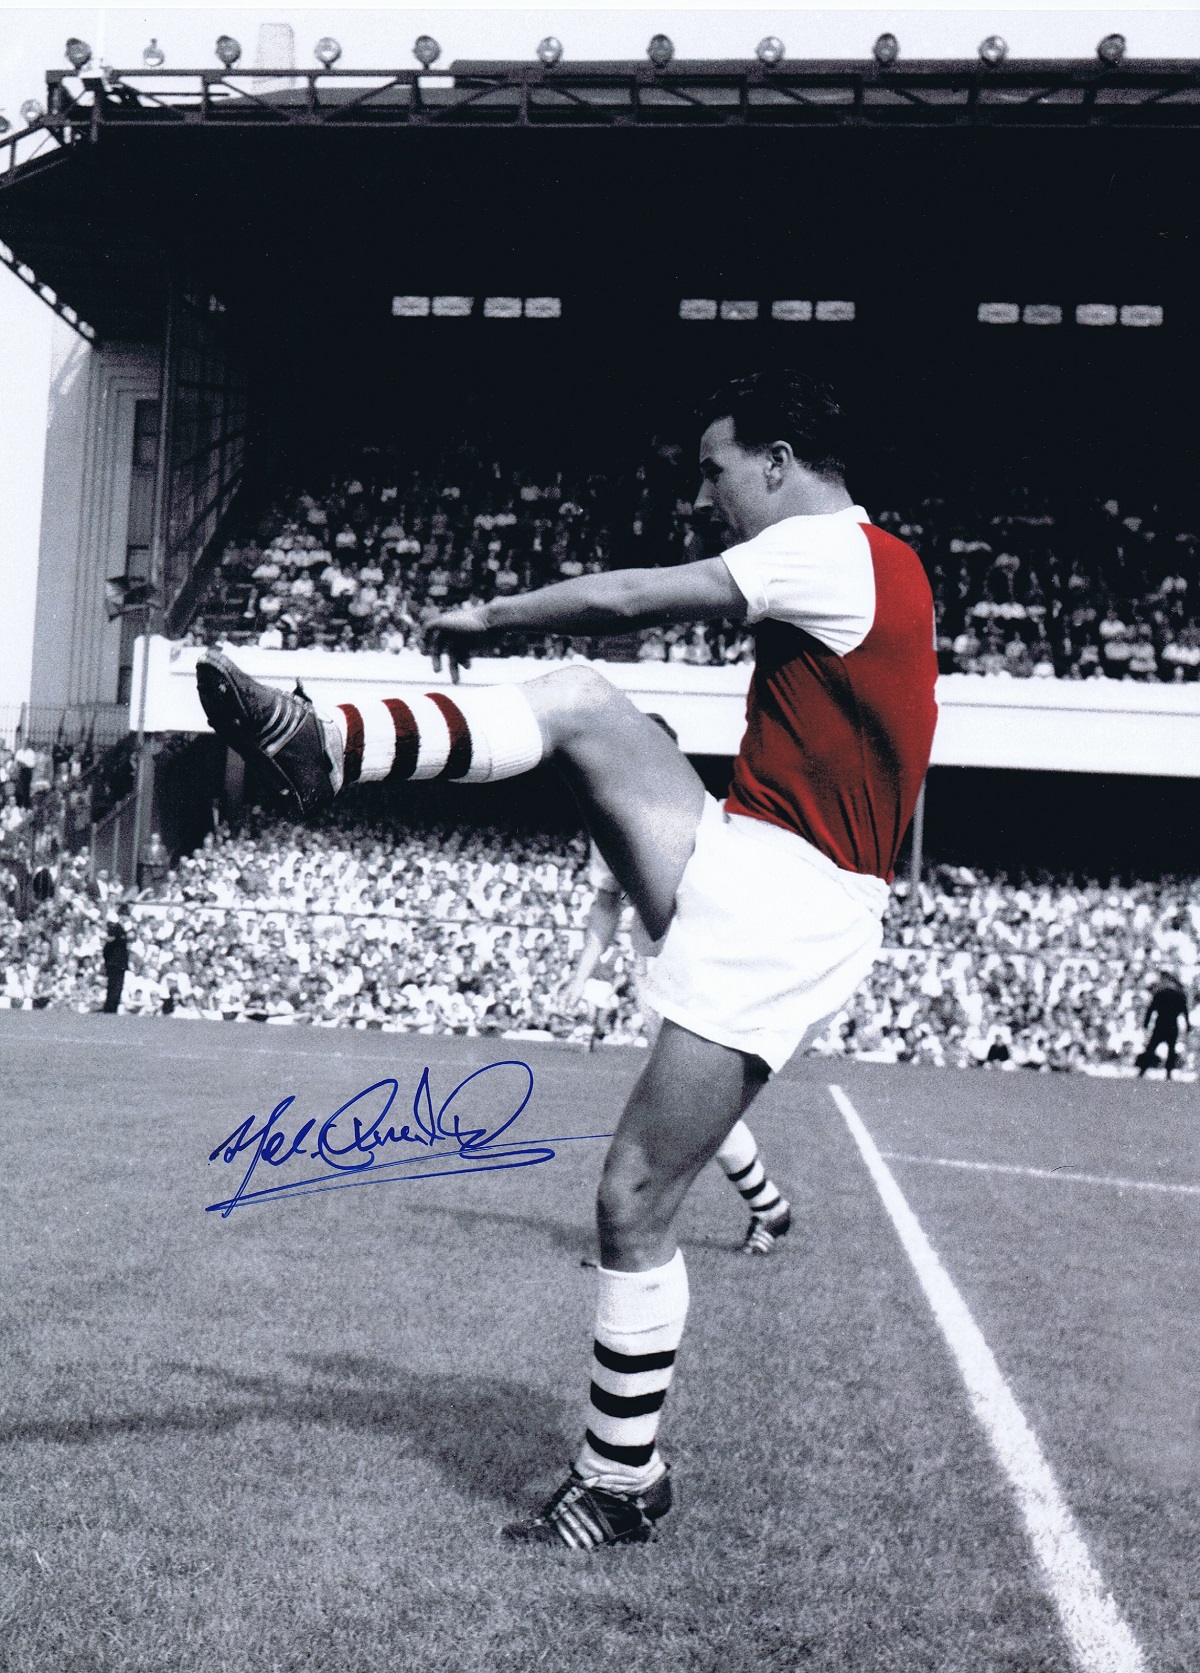 Autographed MEL CHARLES 16 x 12 photo - Colorized, depicting the Arsenal centre-forward warming up